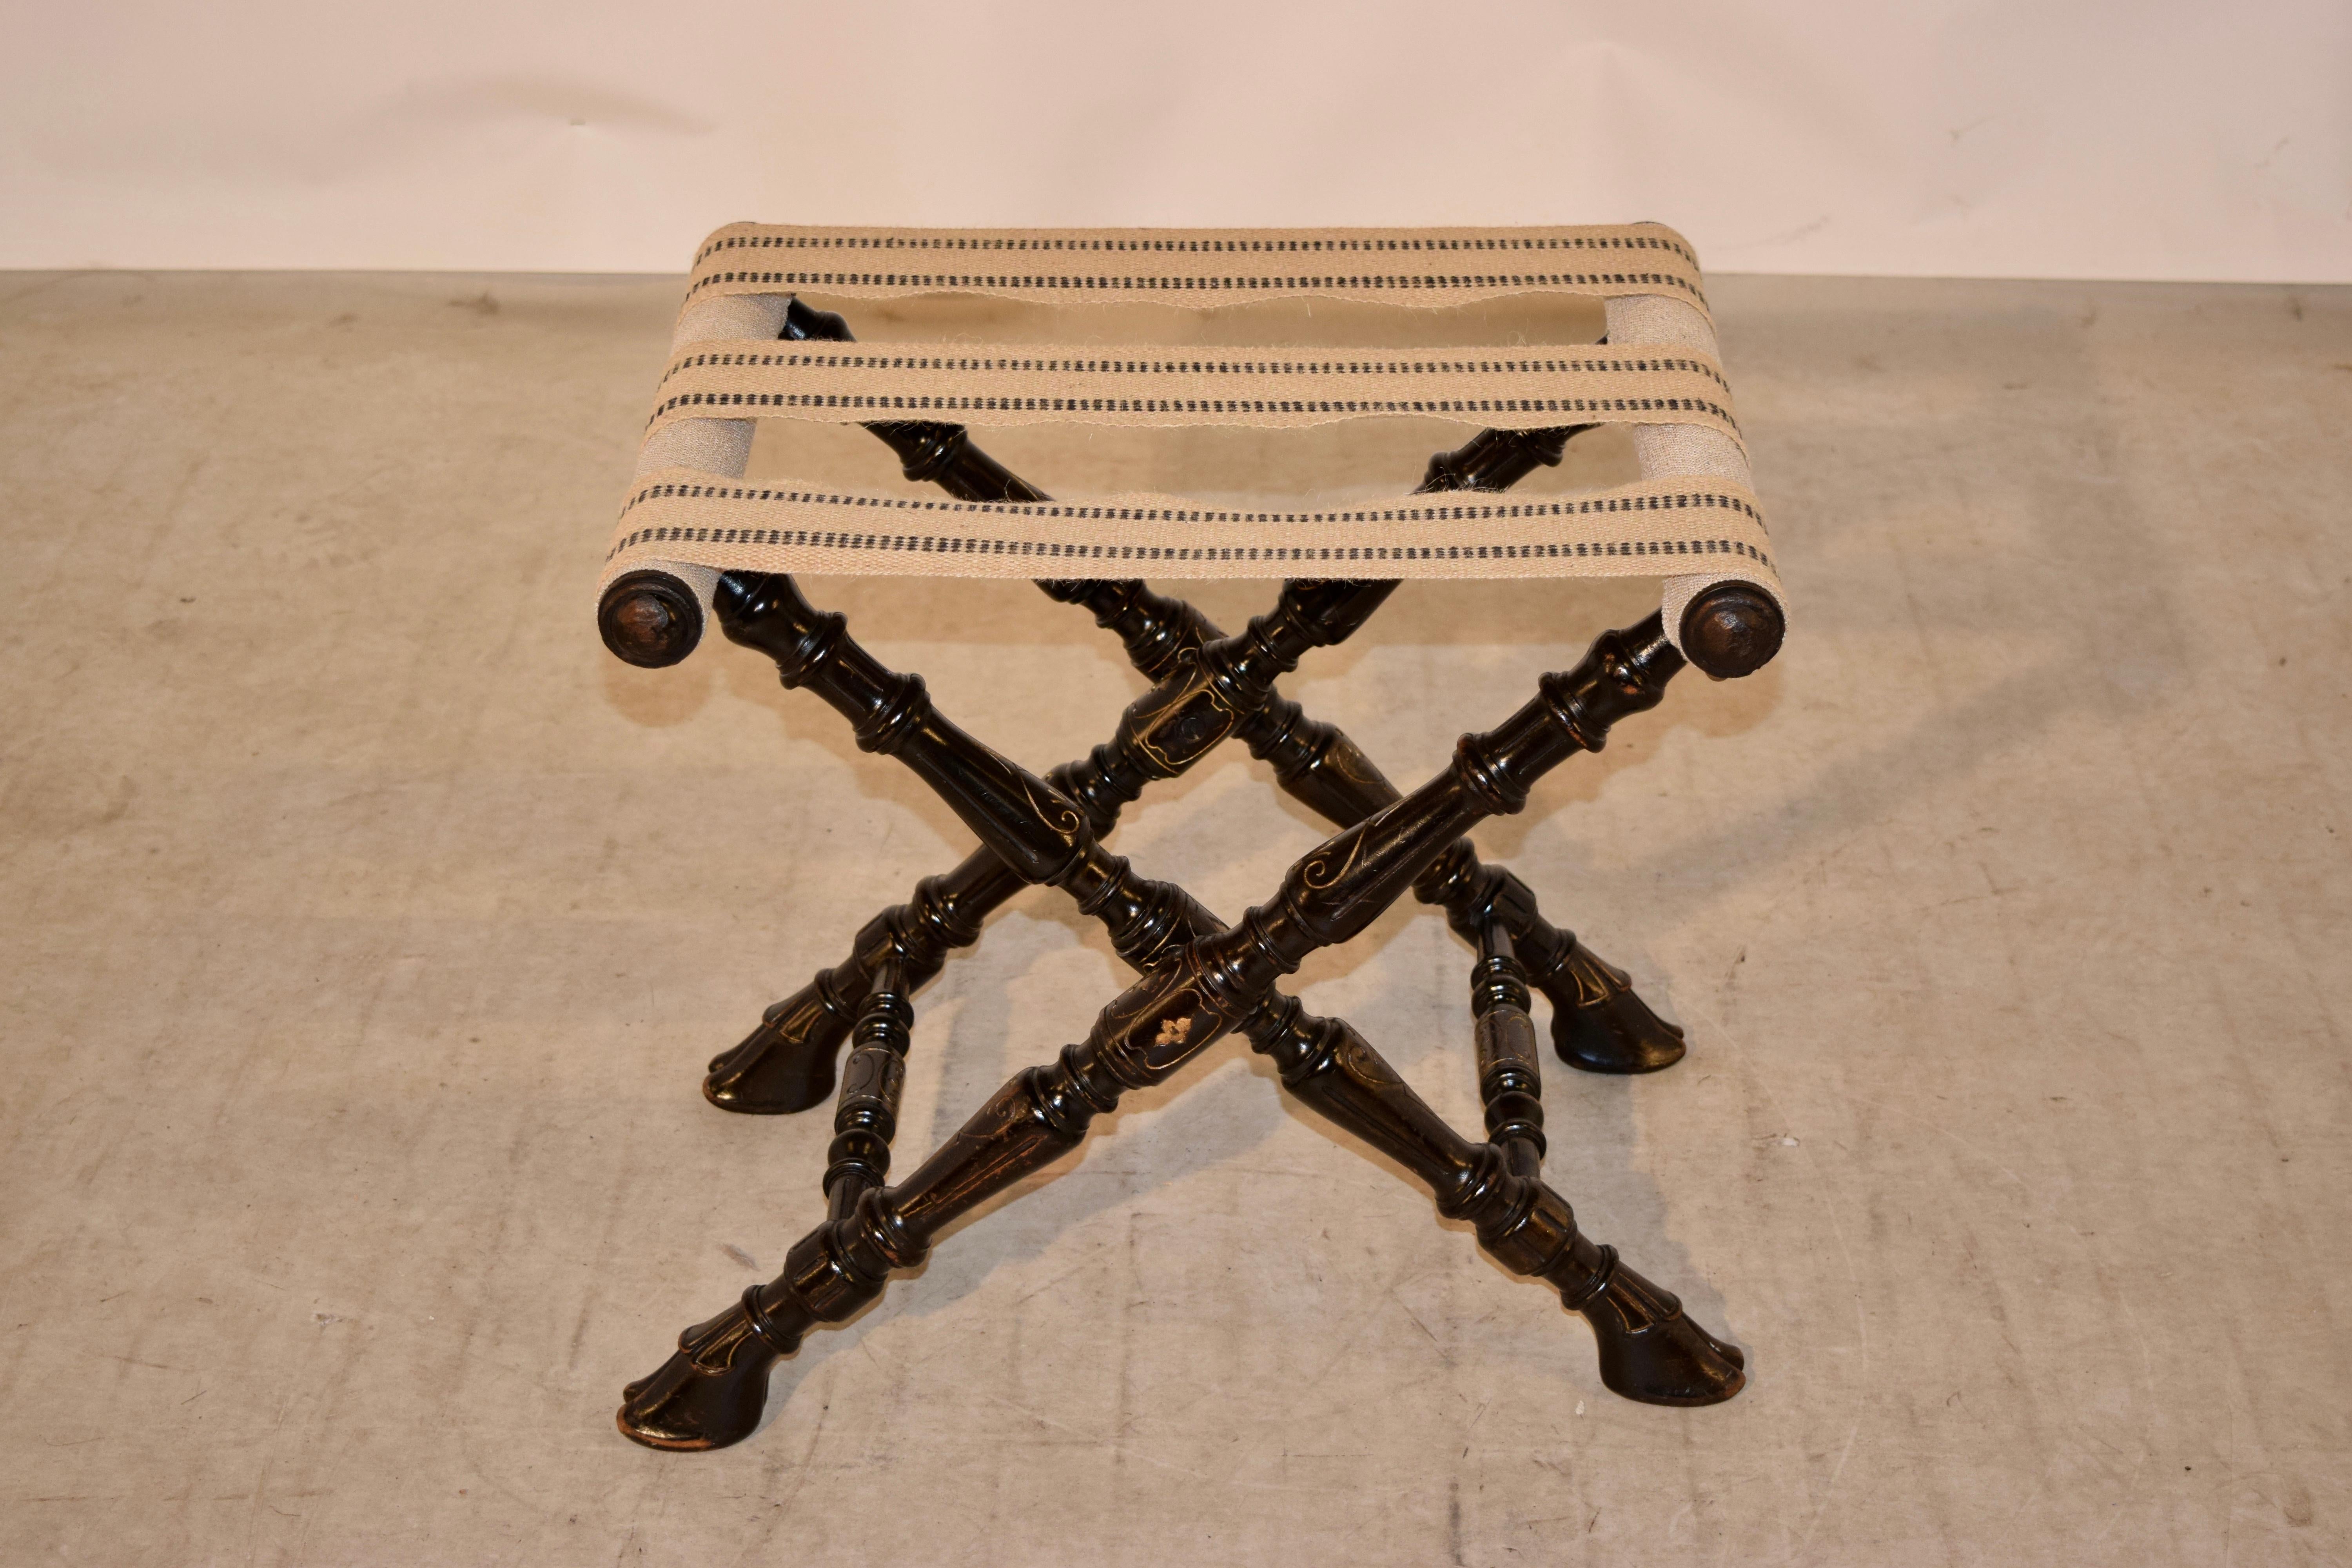 19th century turned folding luggage stand from England made from fruitwood and painted black with hand-painted gold accents. The frame is hand-turned and end in hoof shaped feet. Lovely form and function.